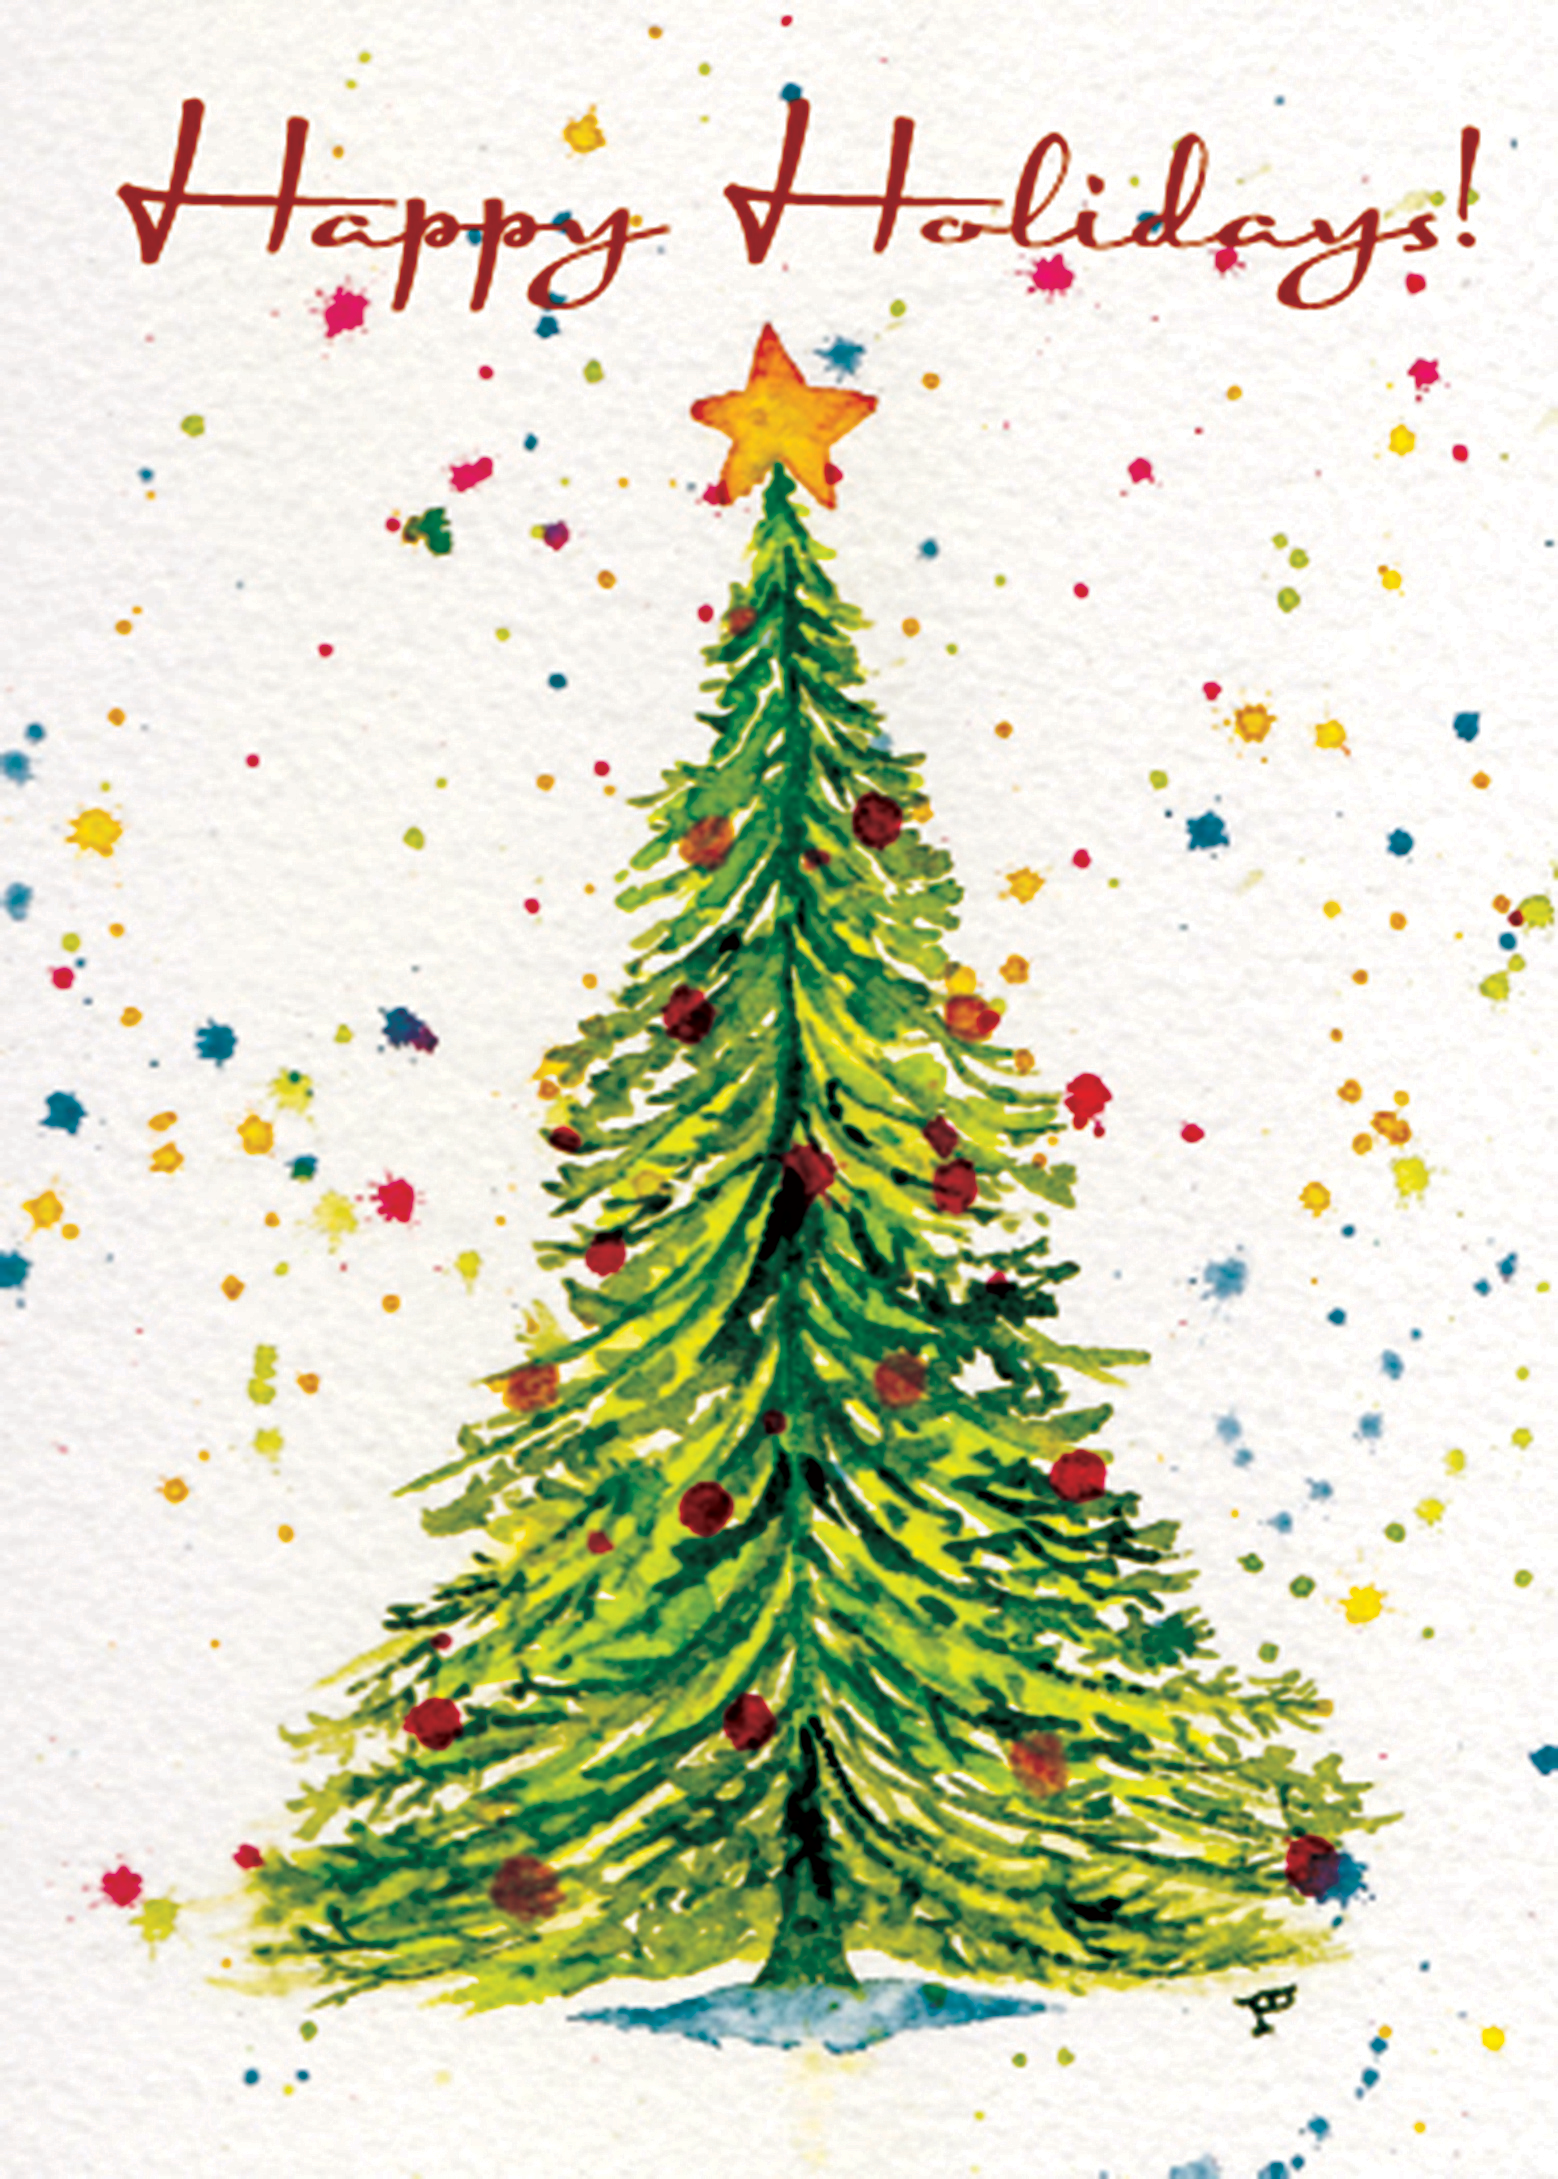 Watercolor painted Christmas Holiday Card